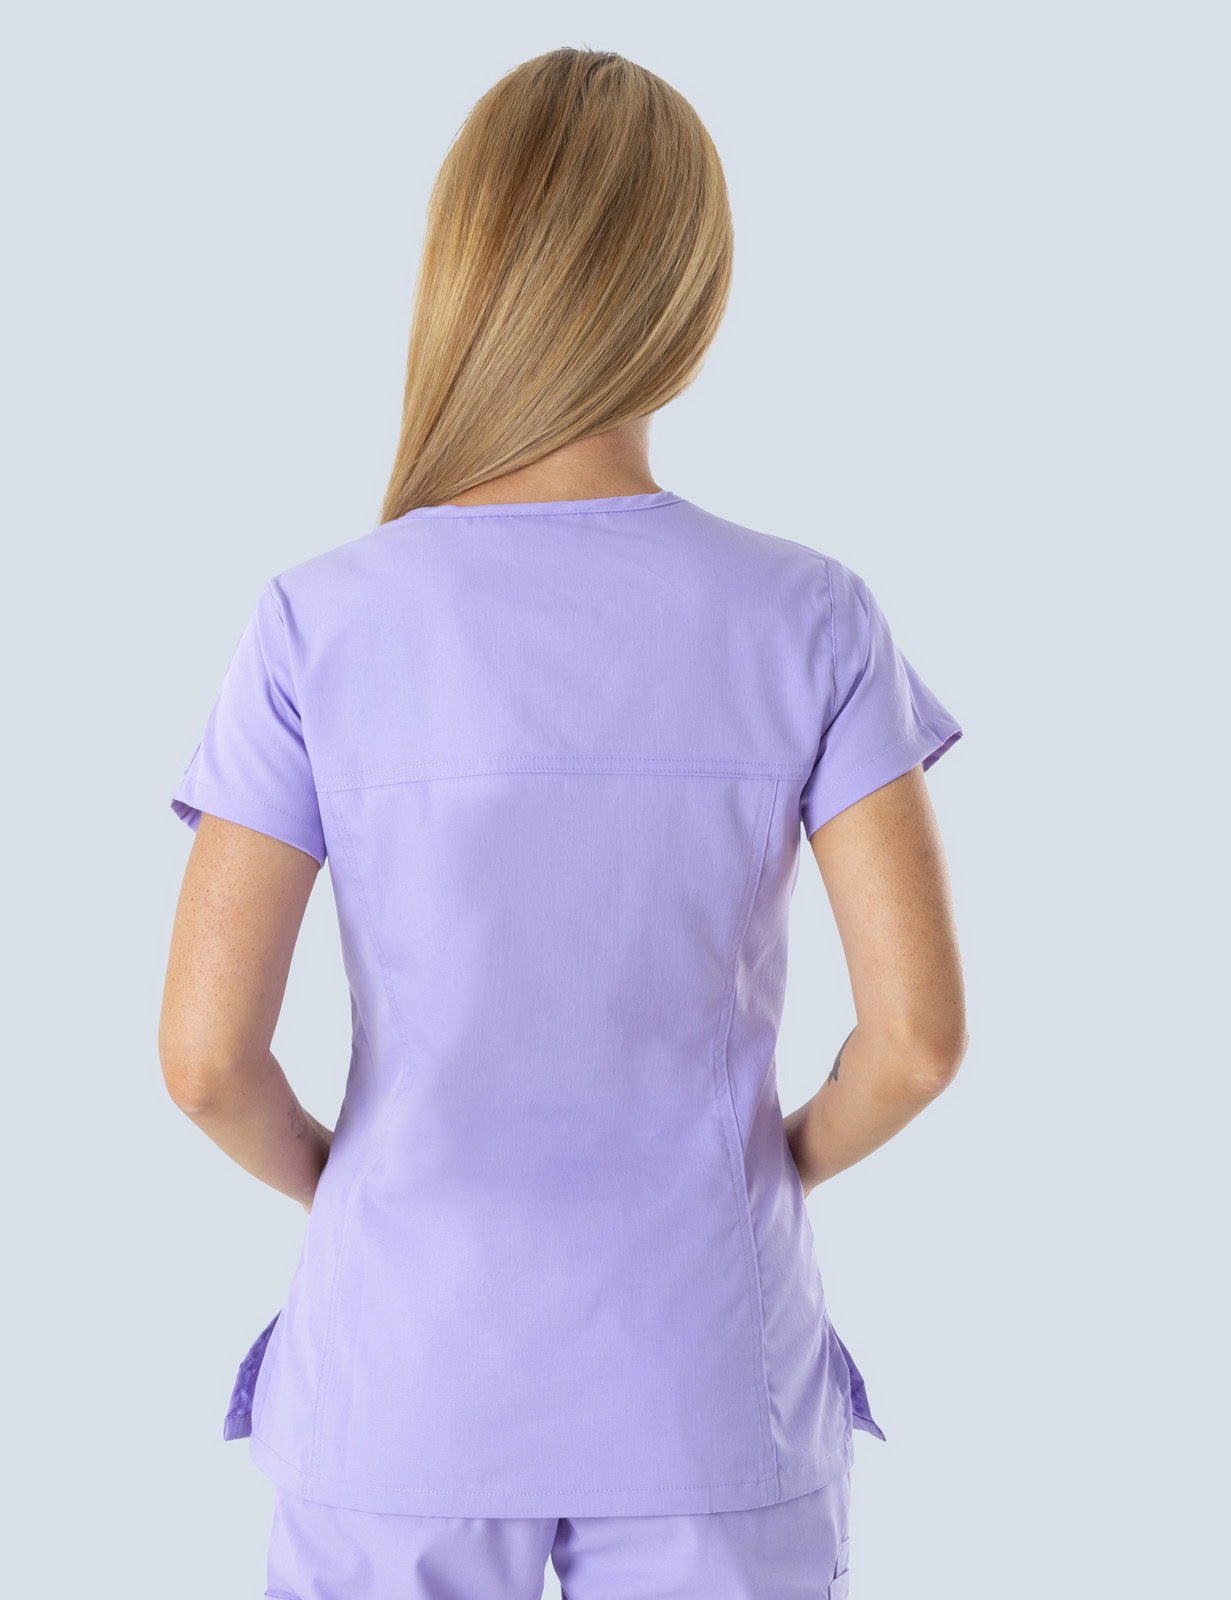 Women's Fit Solid Scrub Top - Lilac - 3X Large - 0